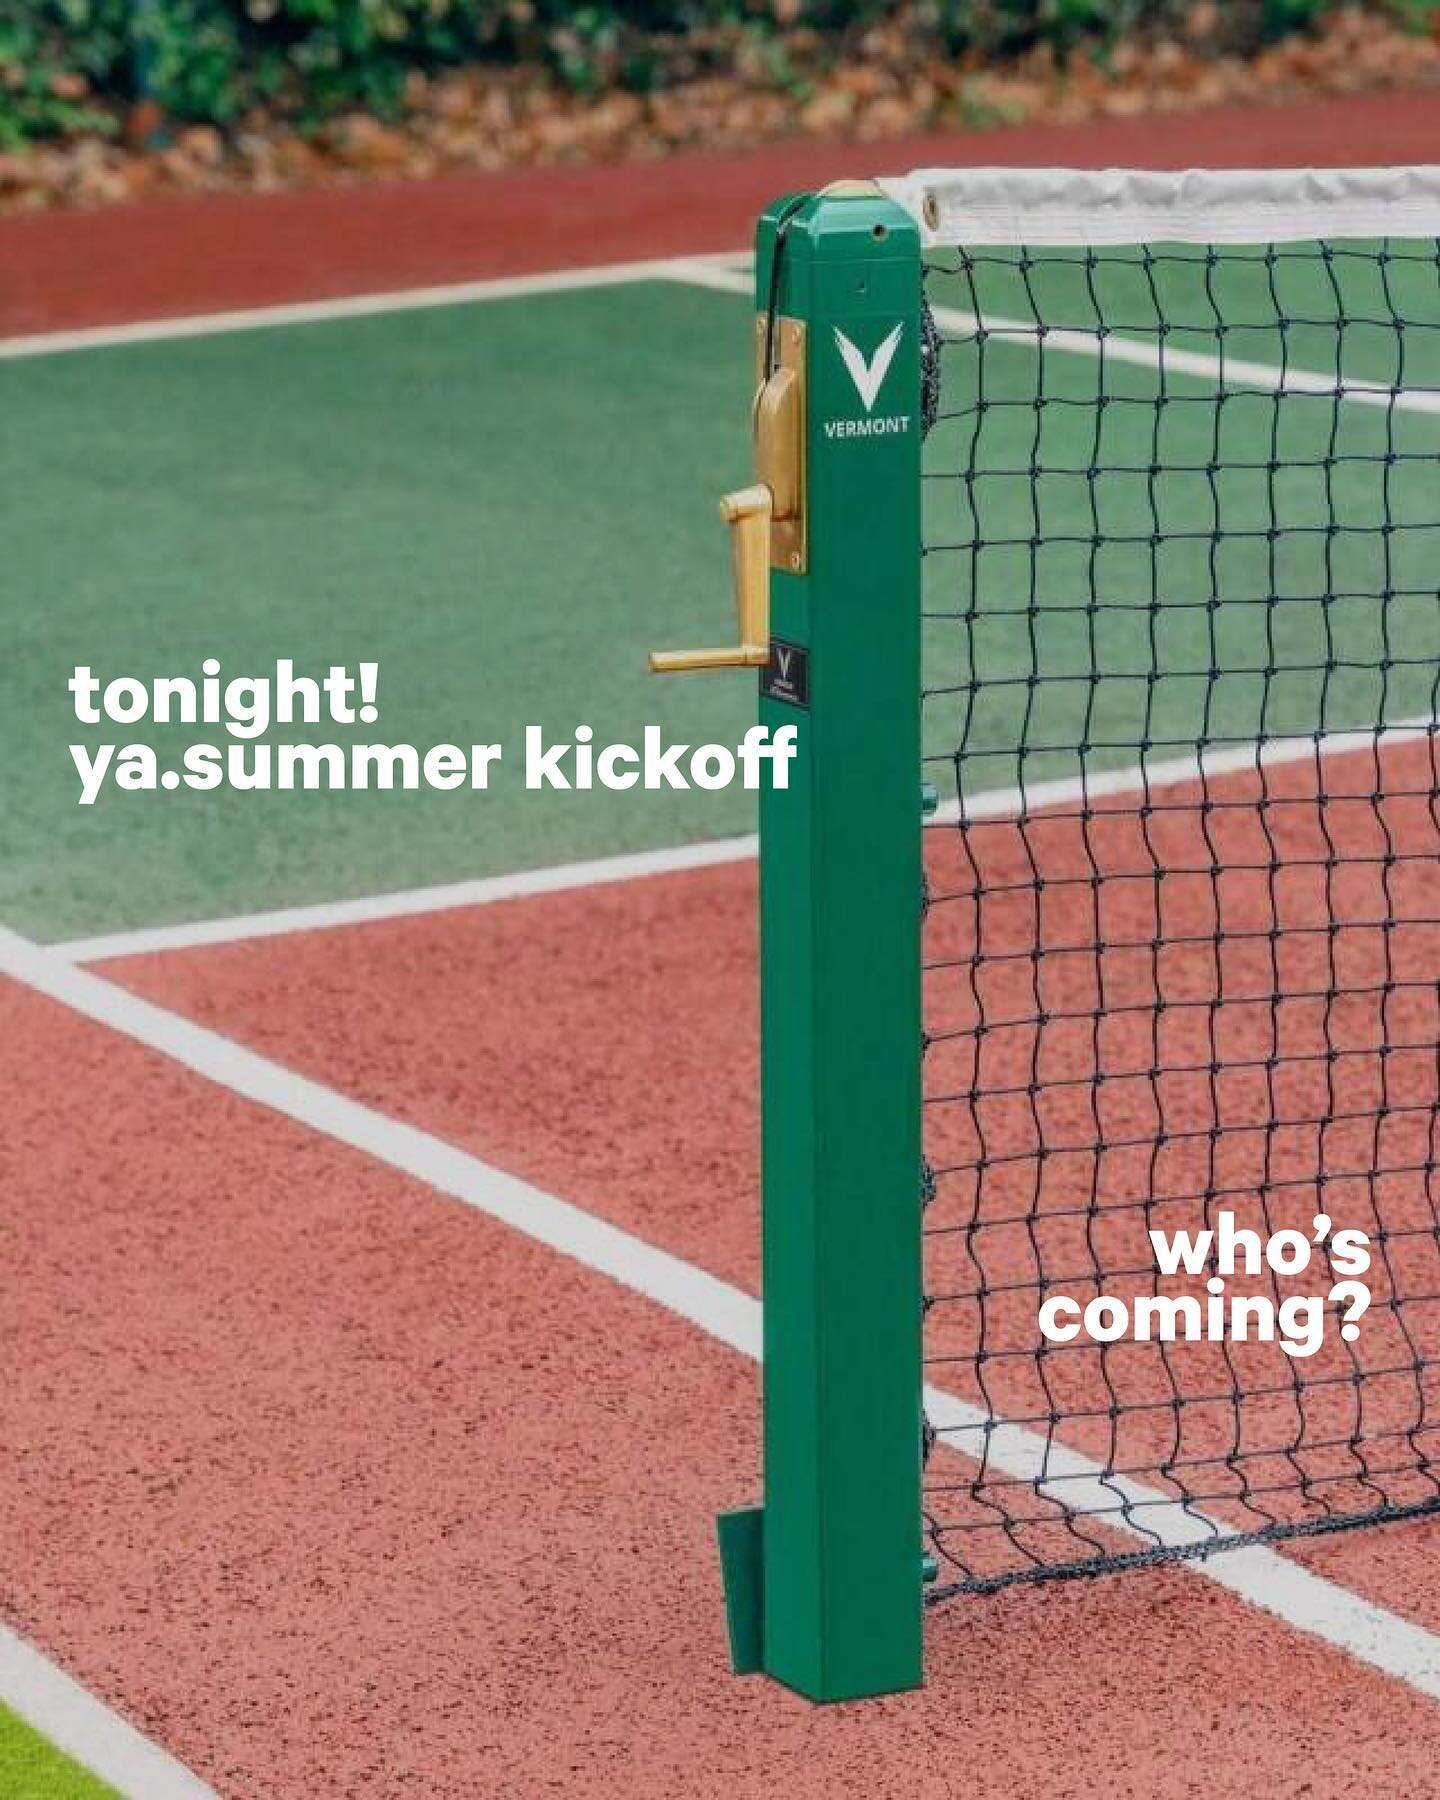 tonight! 

we&rsquo;re kicking off the summer with a hang! 

pickle ball
spike ball
cookout
+ more

invite your friends + bring a snack or non-alcoholic beverage to share!

5:30-9:00pm
negley park
210 cumberland rd
lemoyne pa

see you soon!